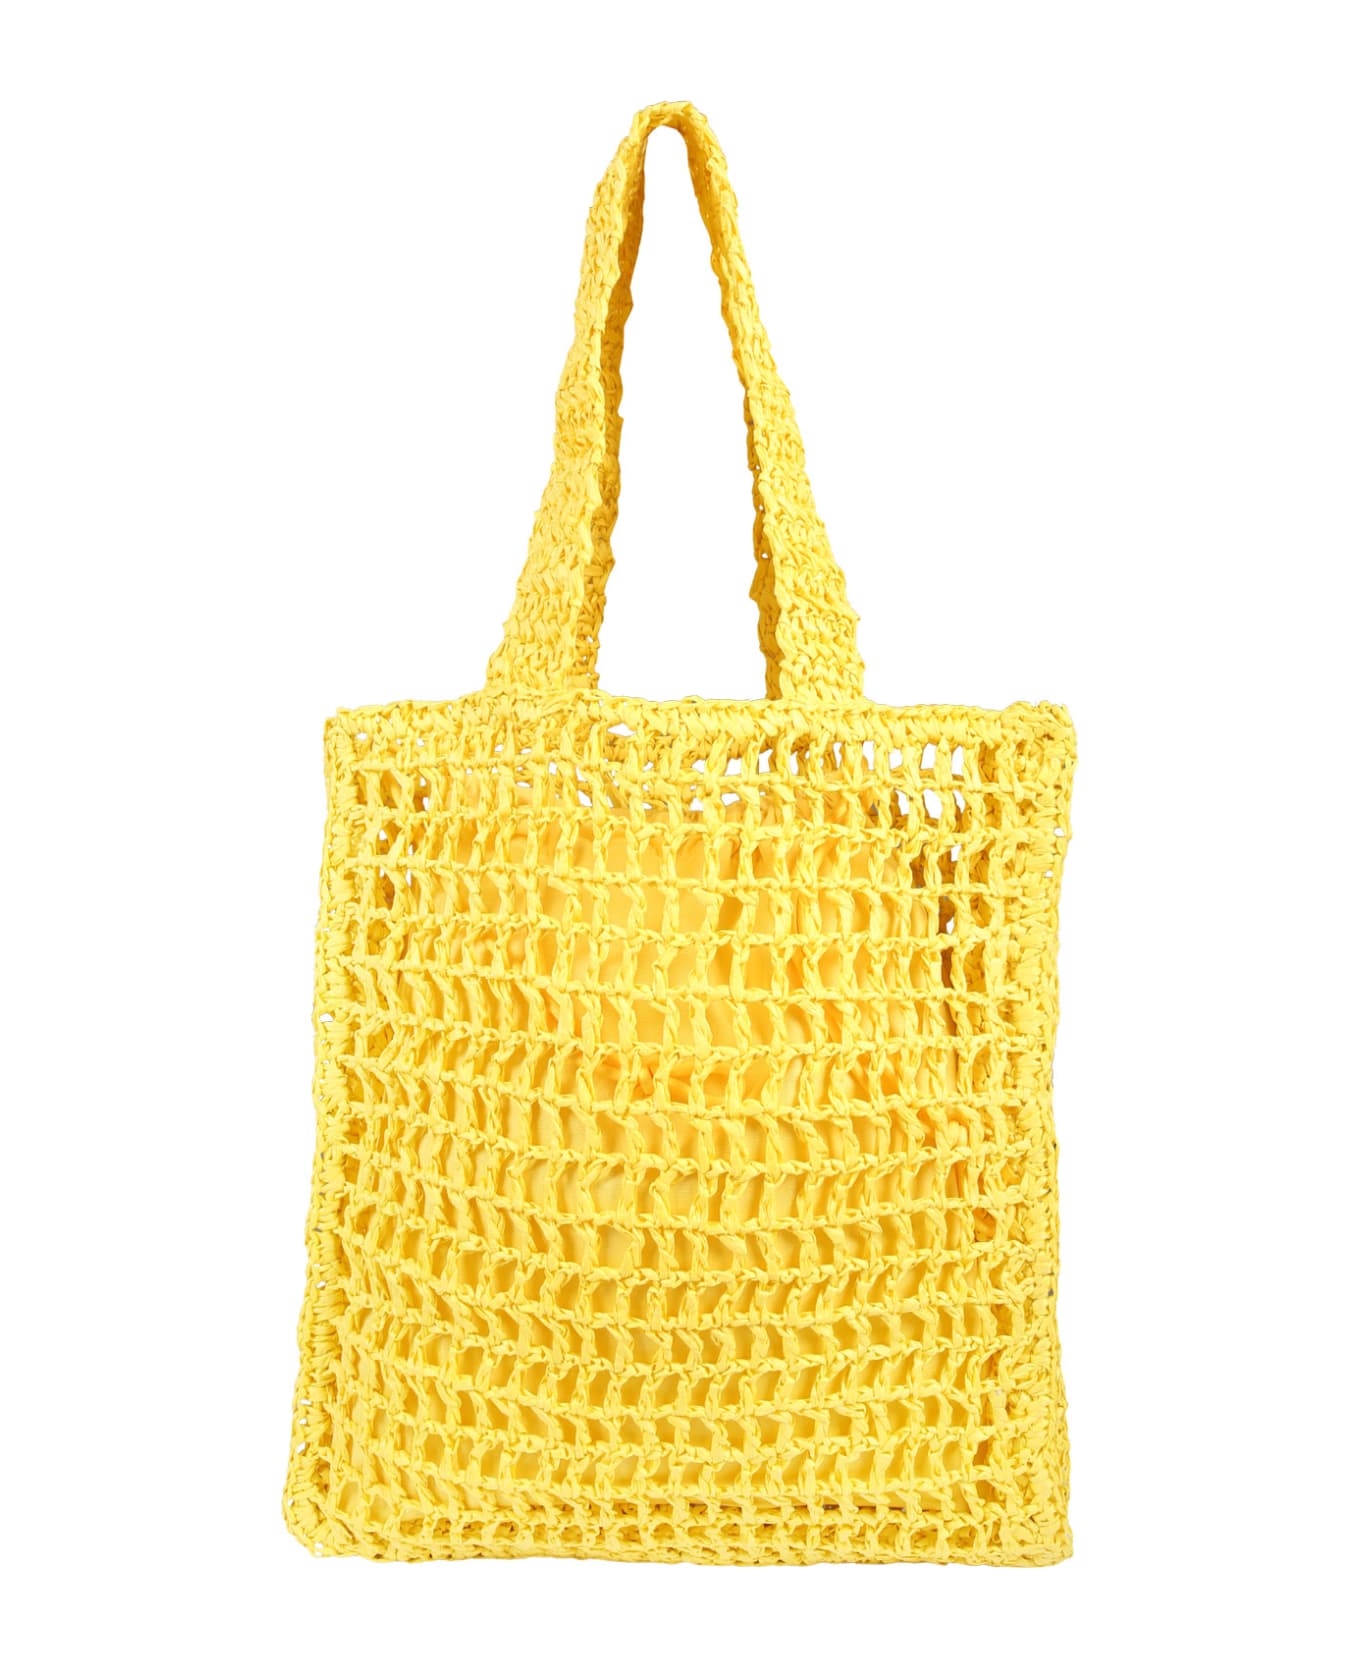 MSGM Yellow Bag For Girl With Logo - Yellow